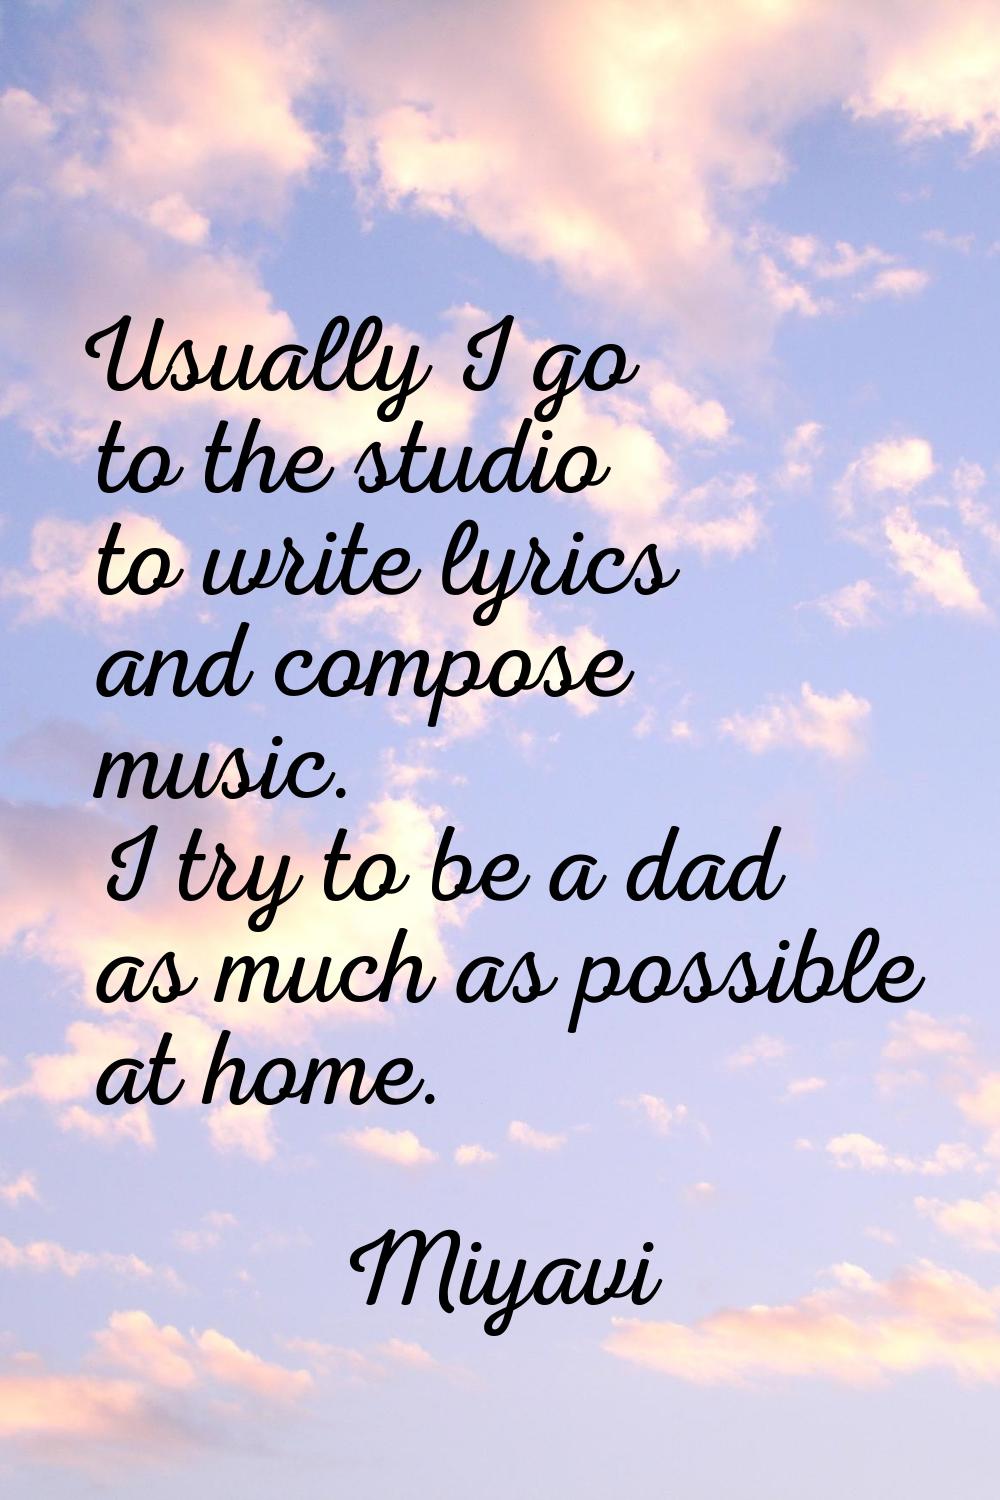 Usually I go to the studio to write lyrics and compose music. I try to be a dad as much as possible